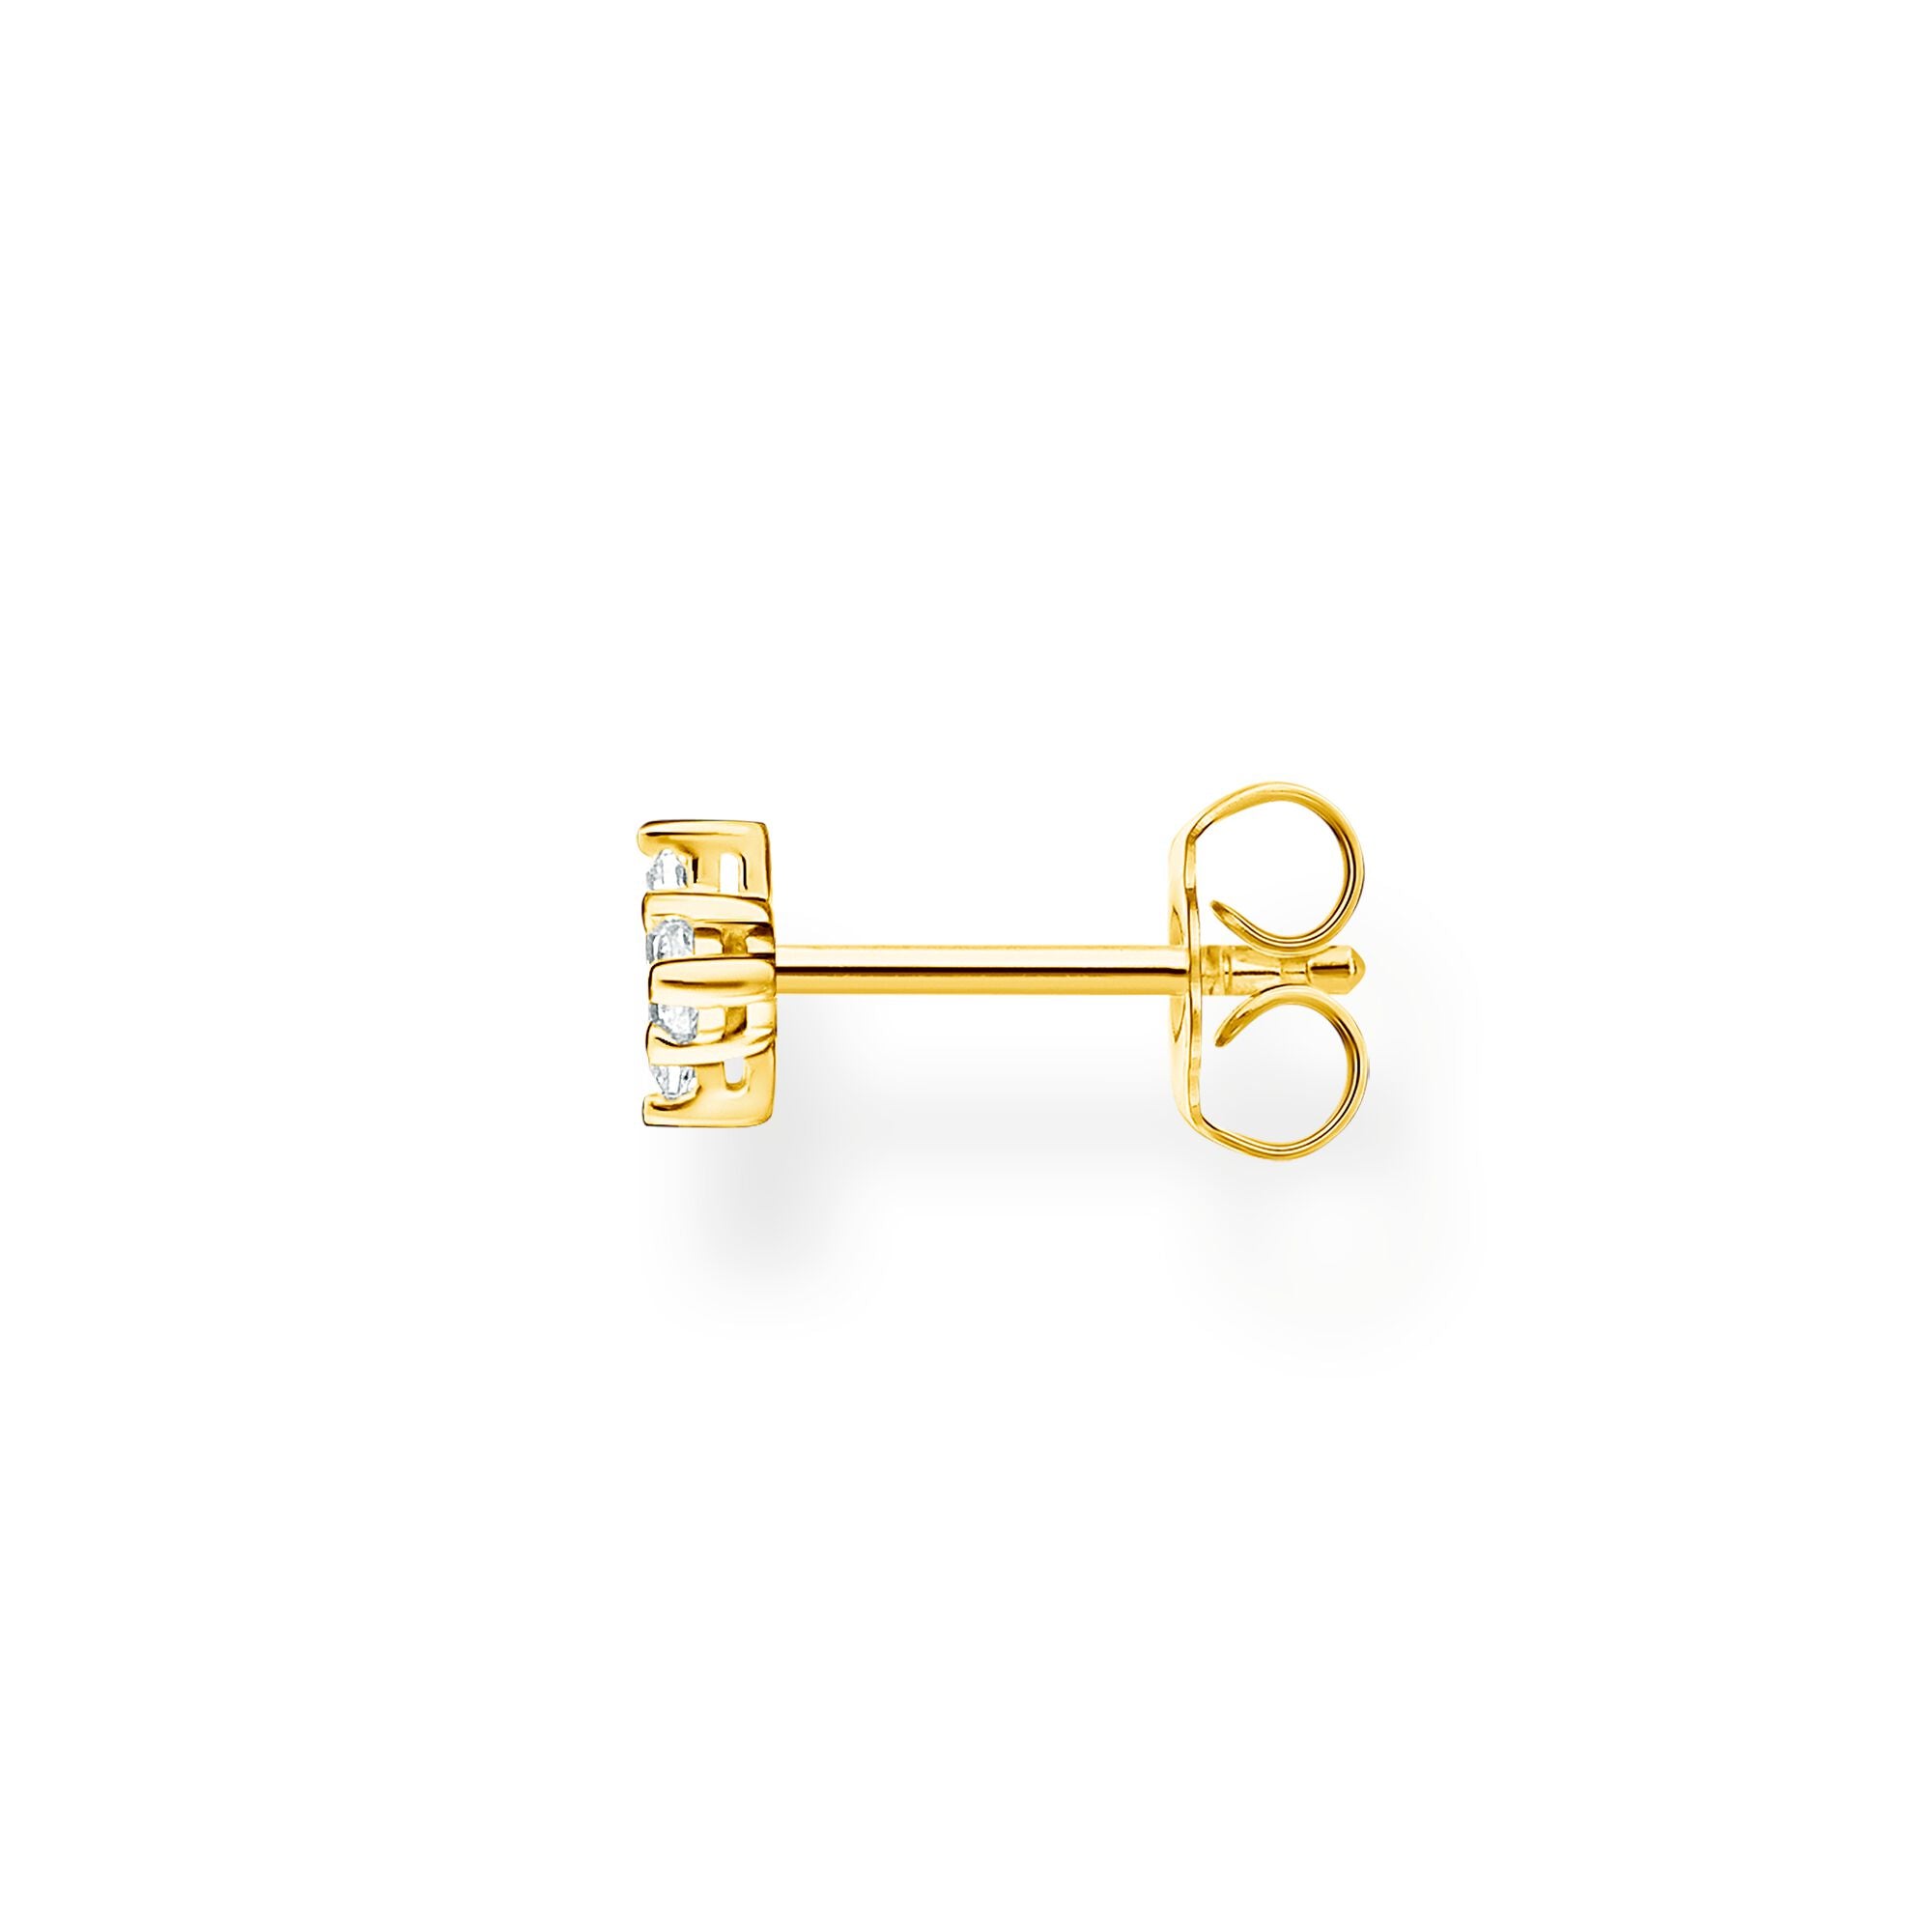 Thomas Sabo 18k yellow gold plated sterling silver and white baguette stone with round stone accent, single stud earring